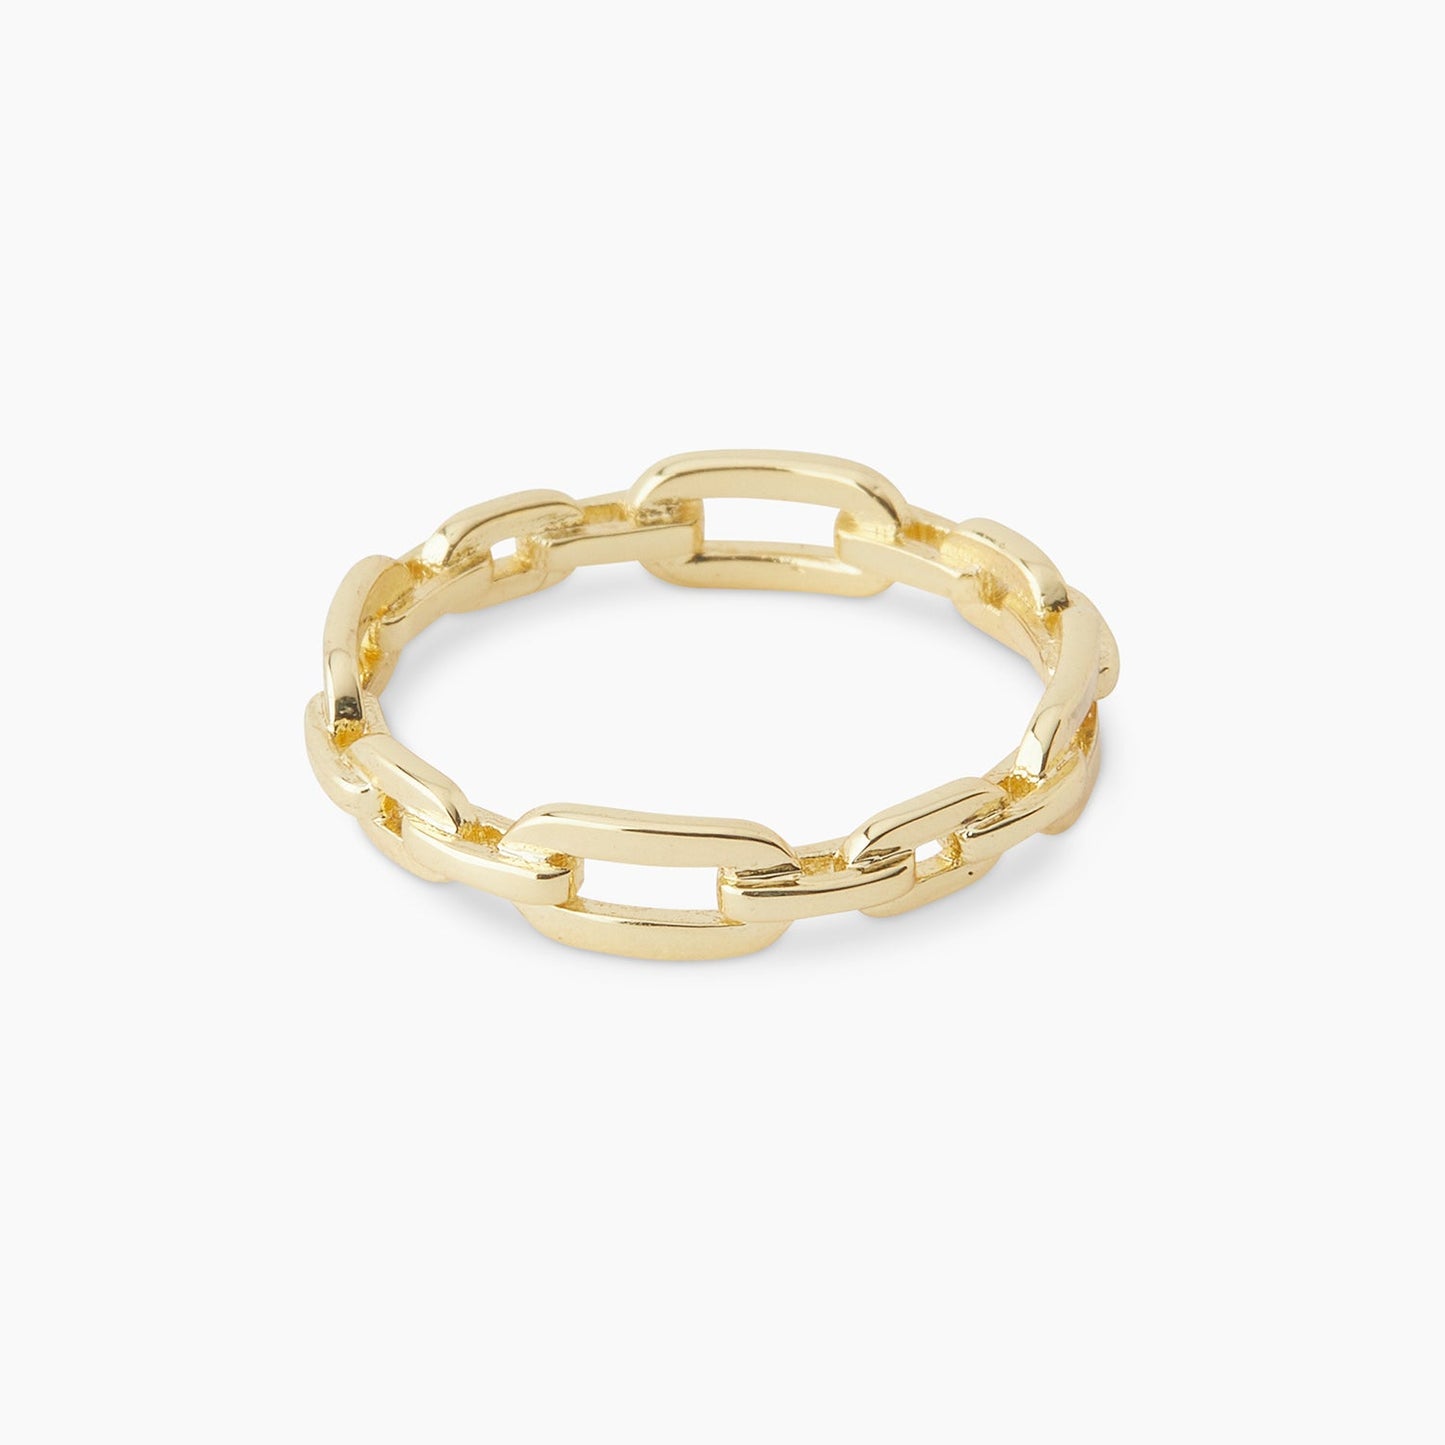 Gorjana Parker Link Ring - Available in Gold or Silver